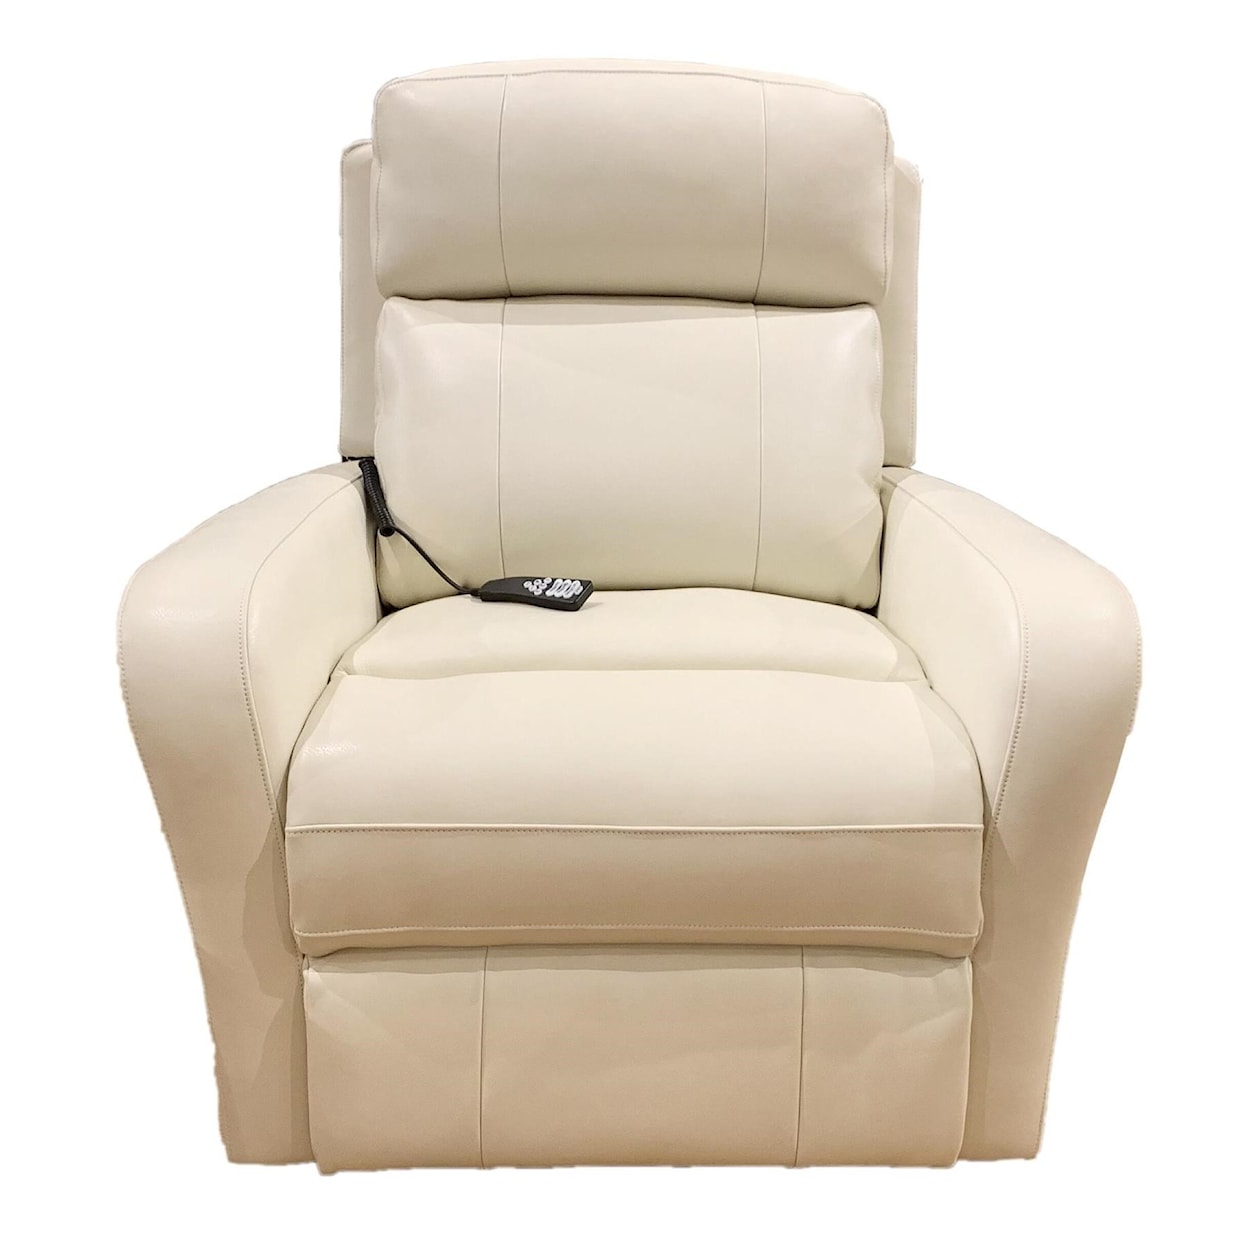 Synergy Home Furnishings 1910 Power Recliner